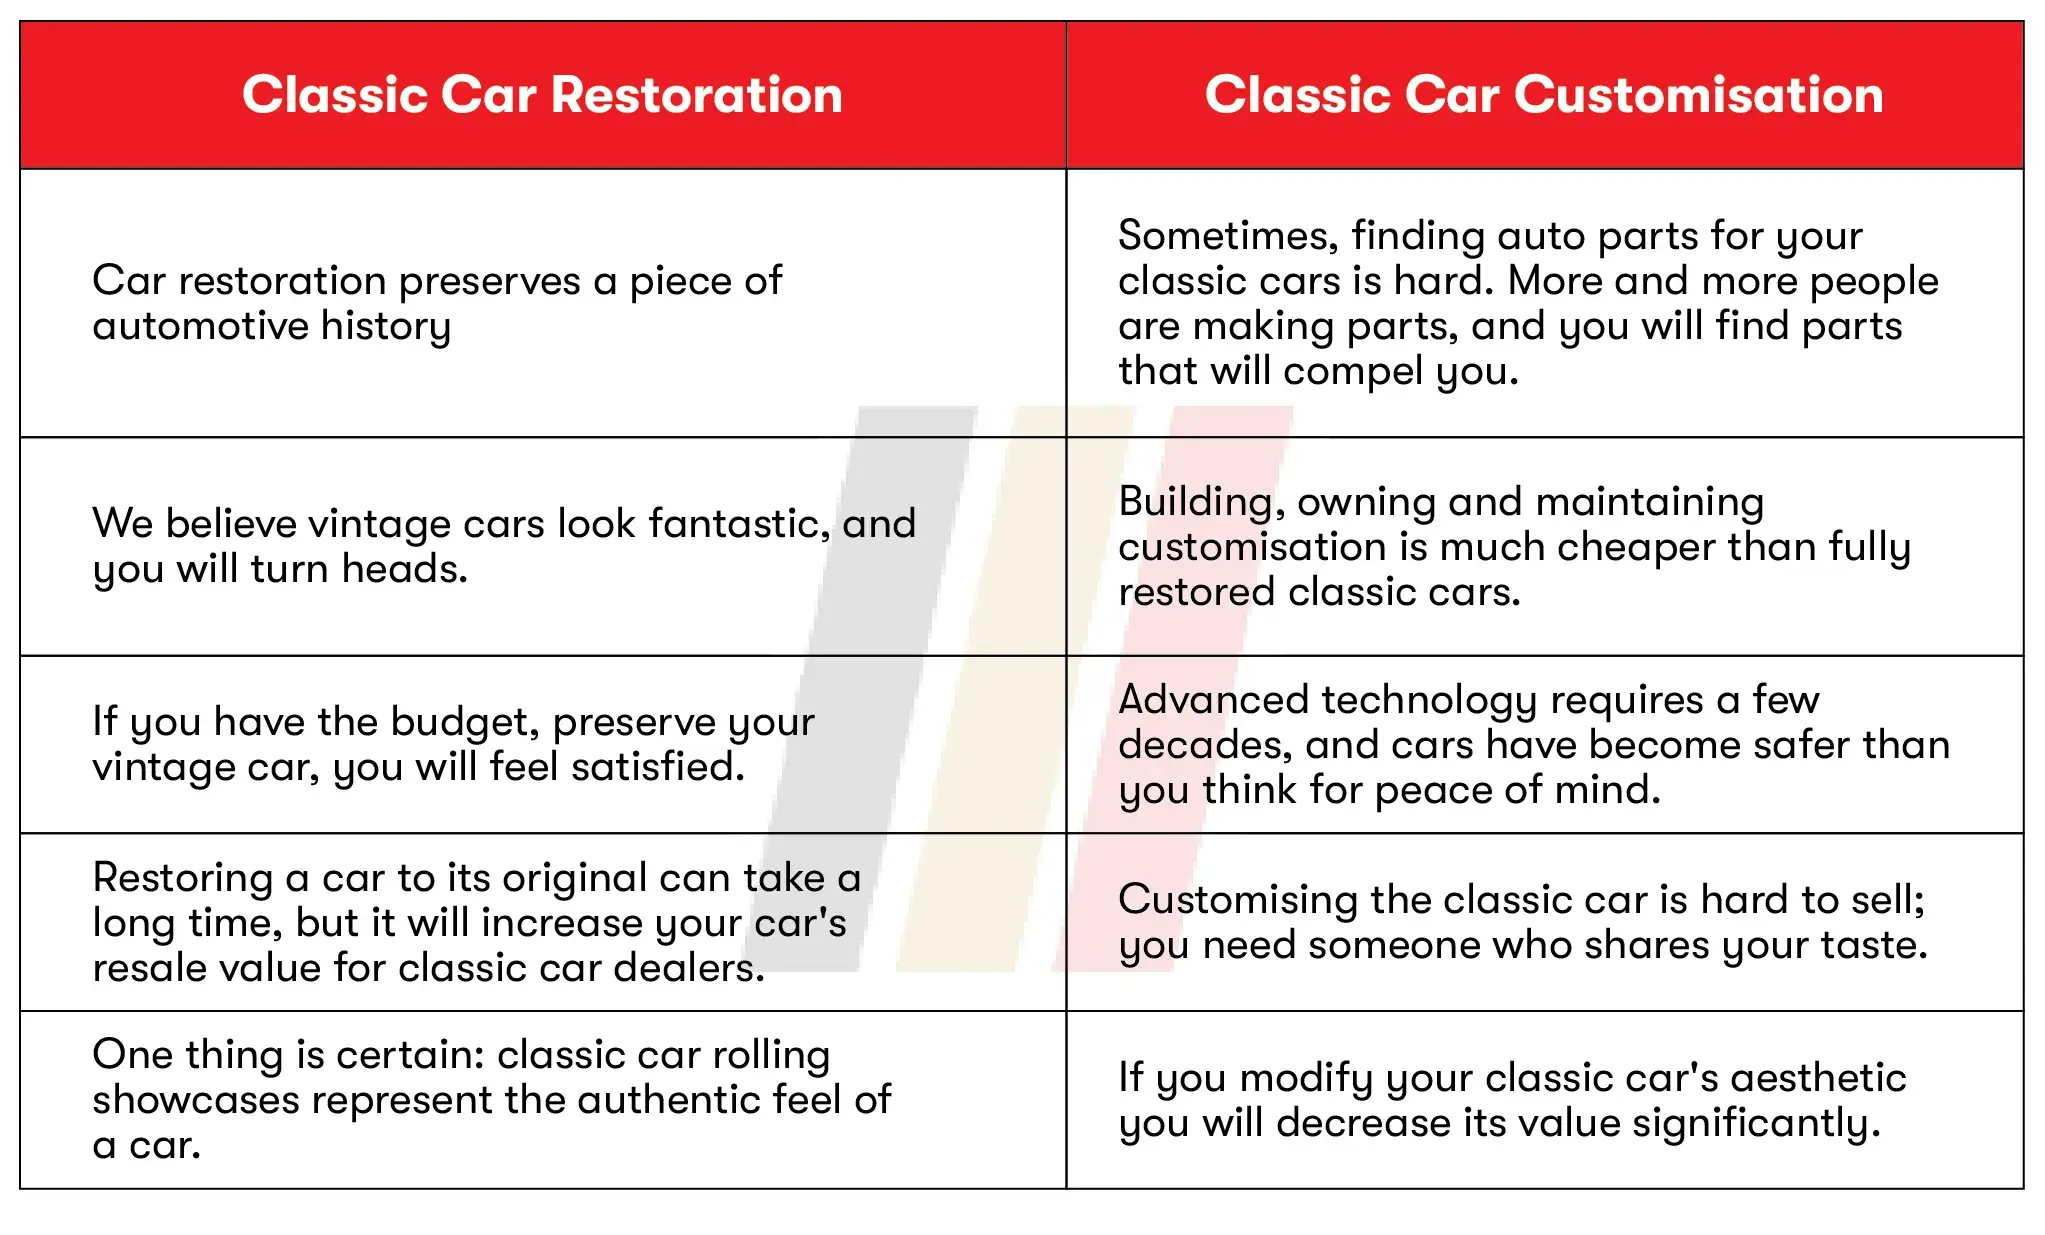 Restoration Or Customisation: Which One Is Better For Classic Car?